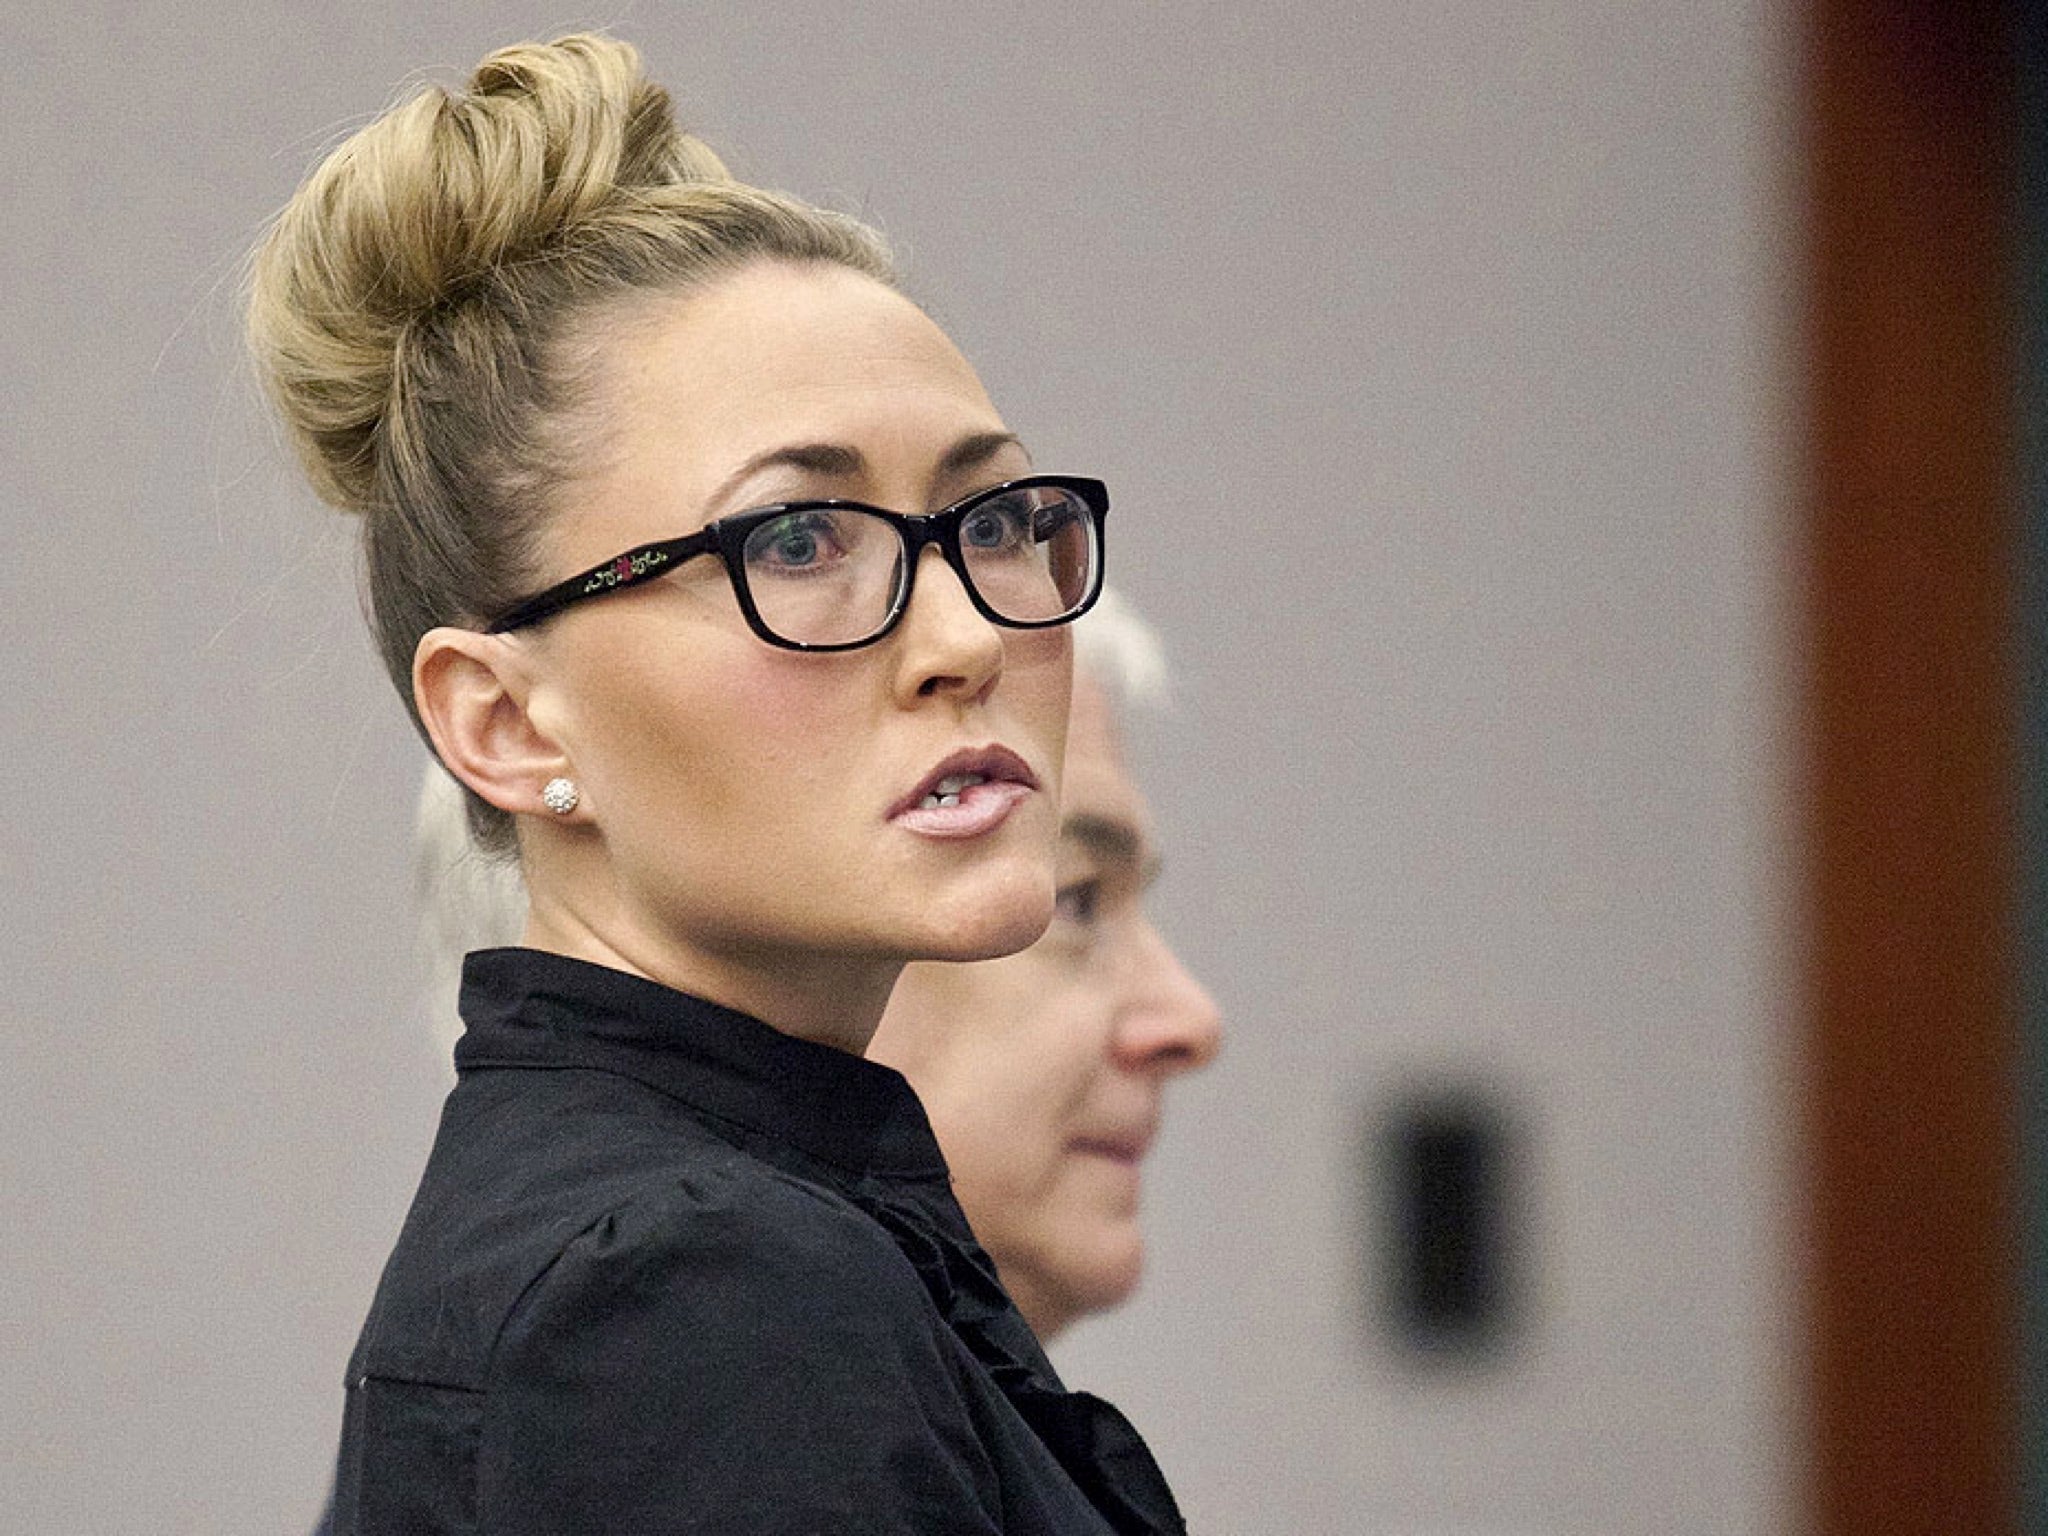 Utah teacher Brianne Altice defends relationship with teenage student The Independent The Independent pic photo picture